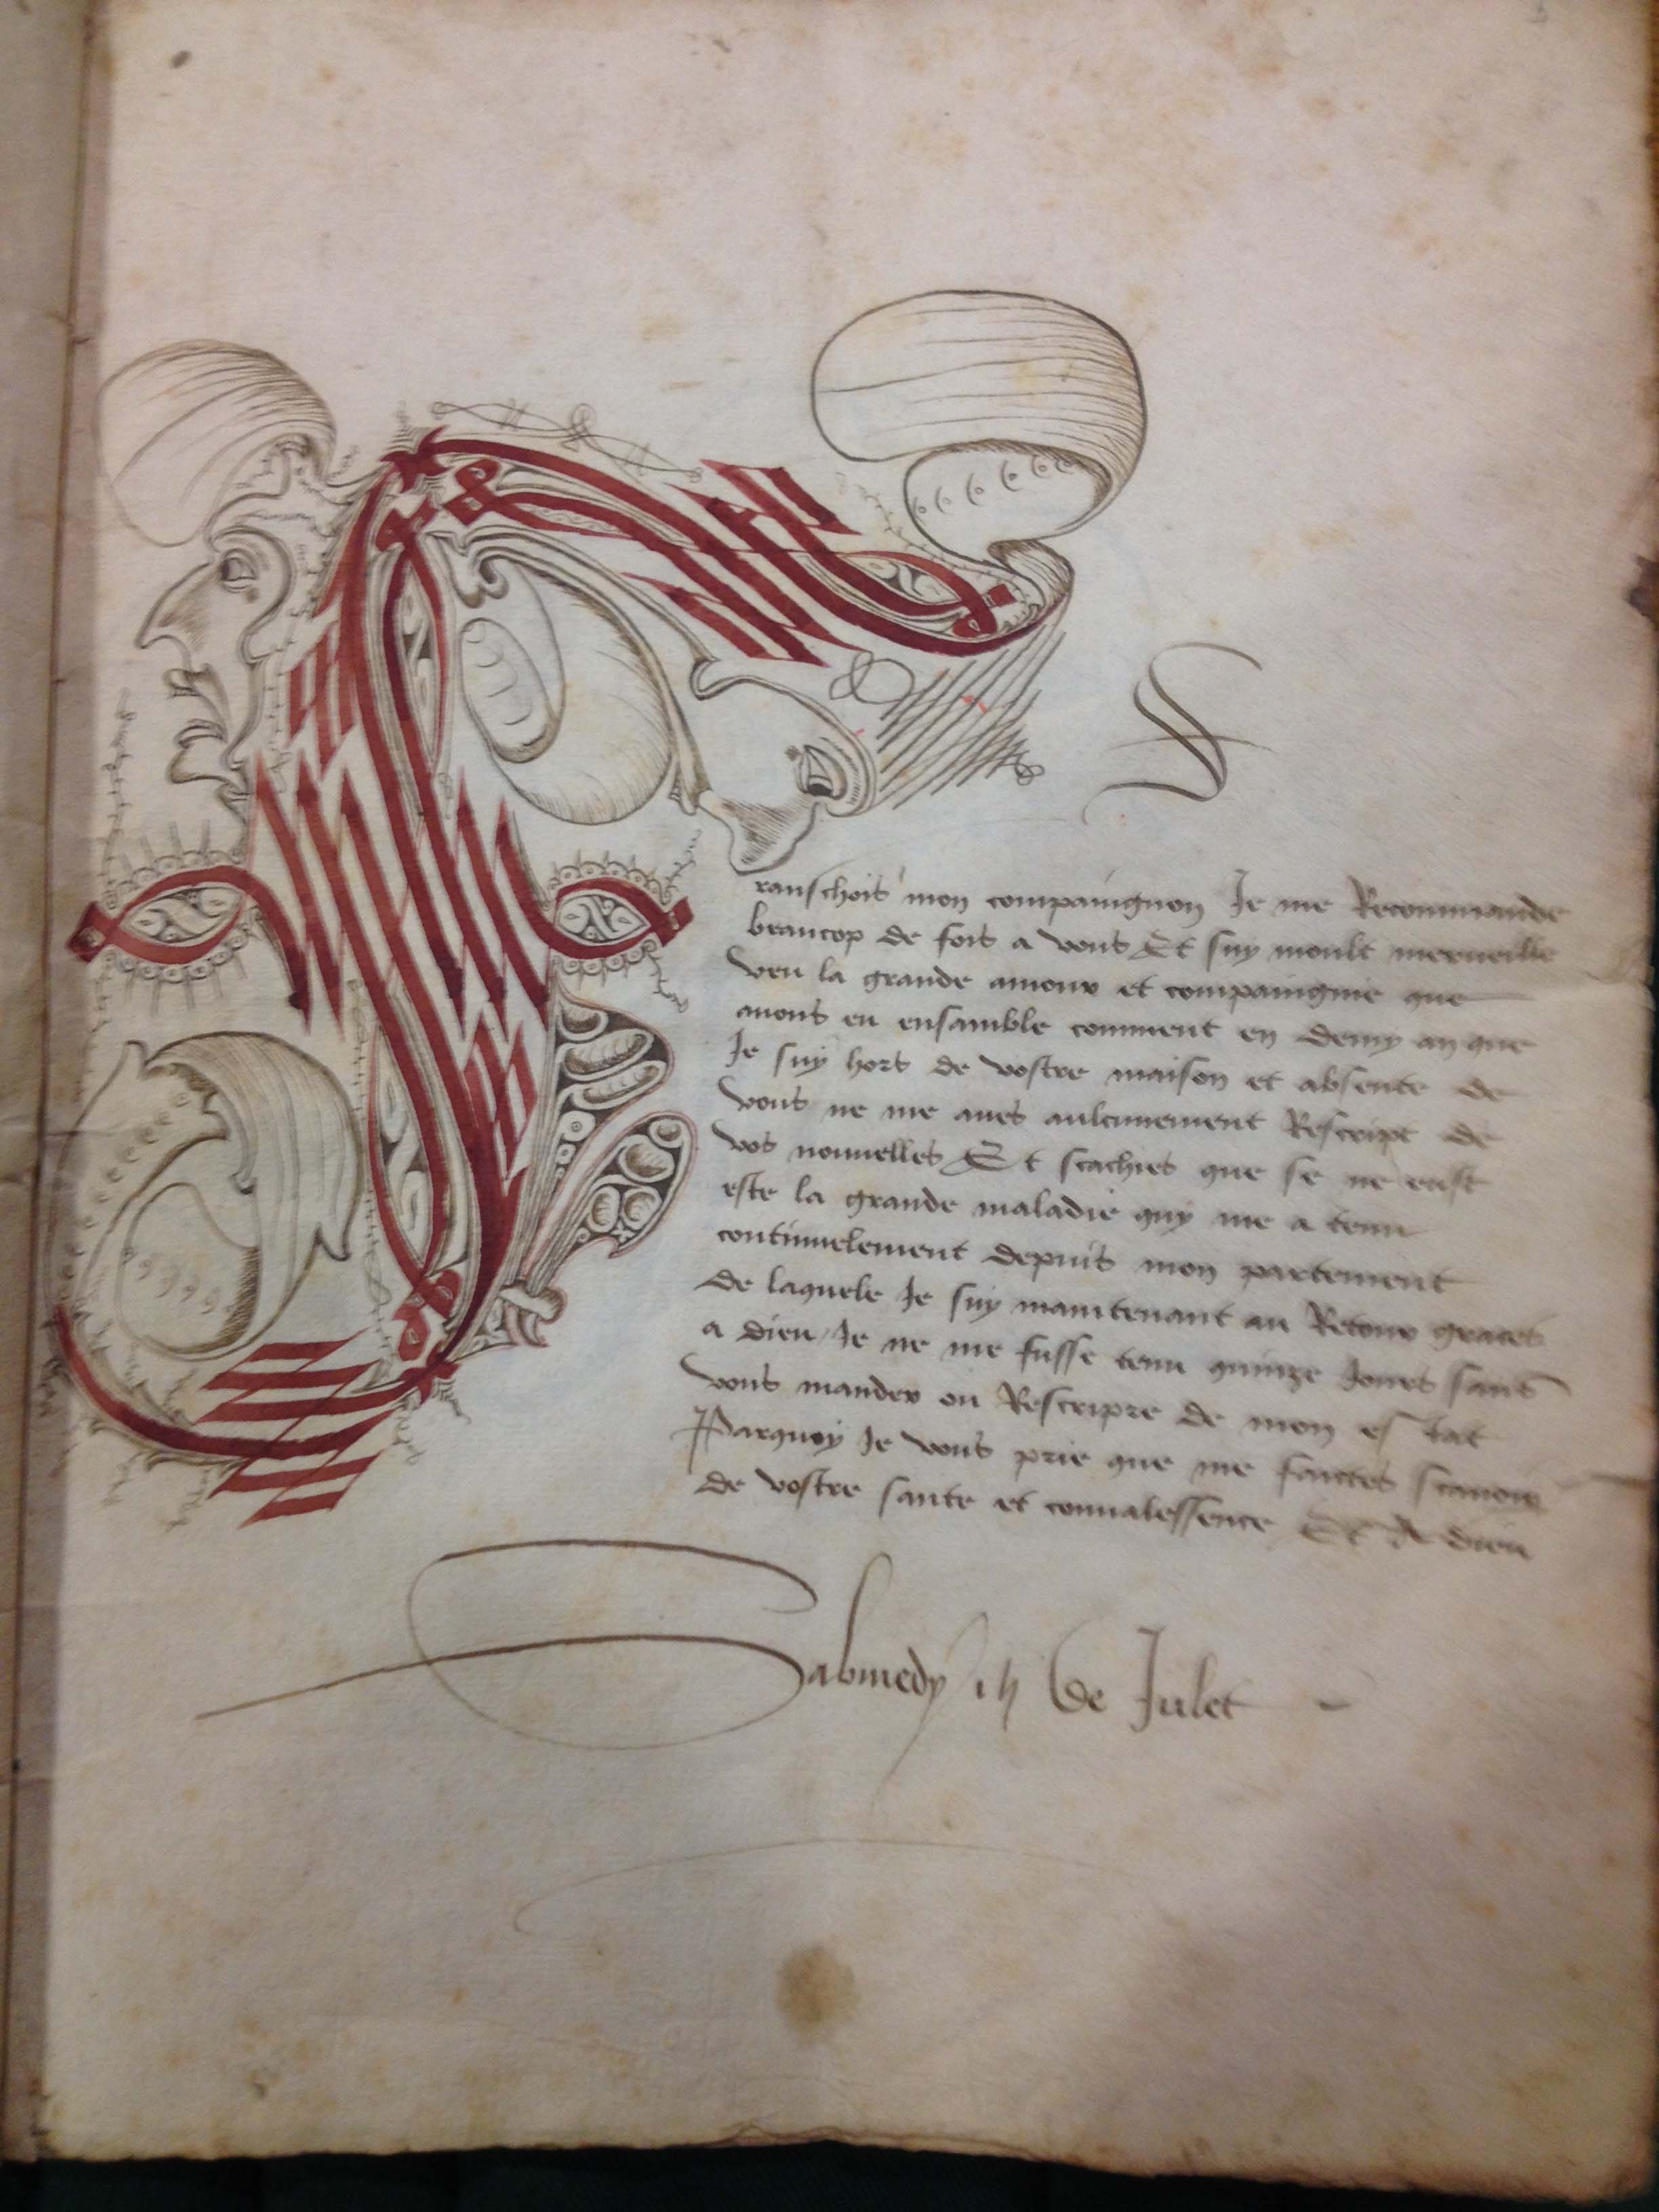 Alphabet book of form letters in a chancery hand from Flanders 1520s Newberry Library Call Number:VAULT folio Wing MS 118